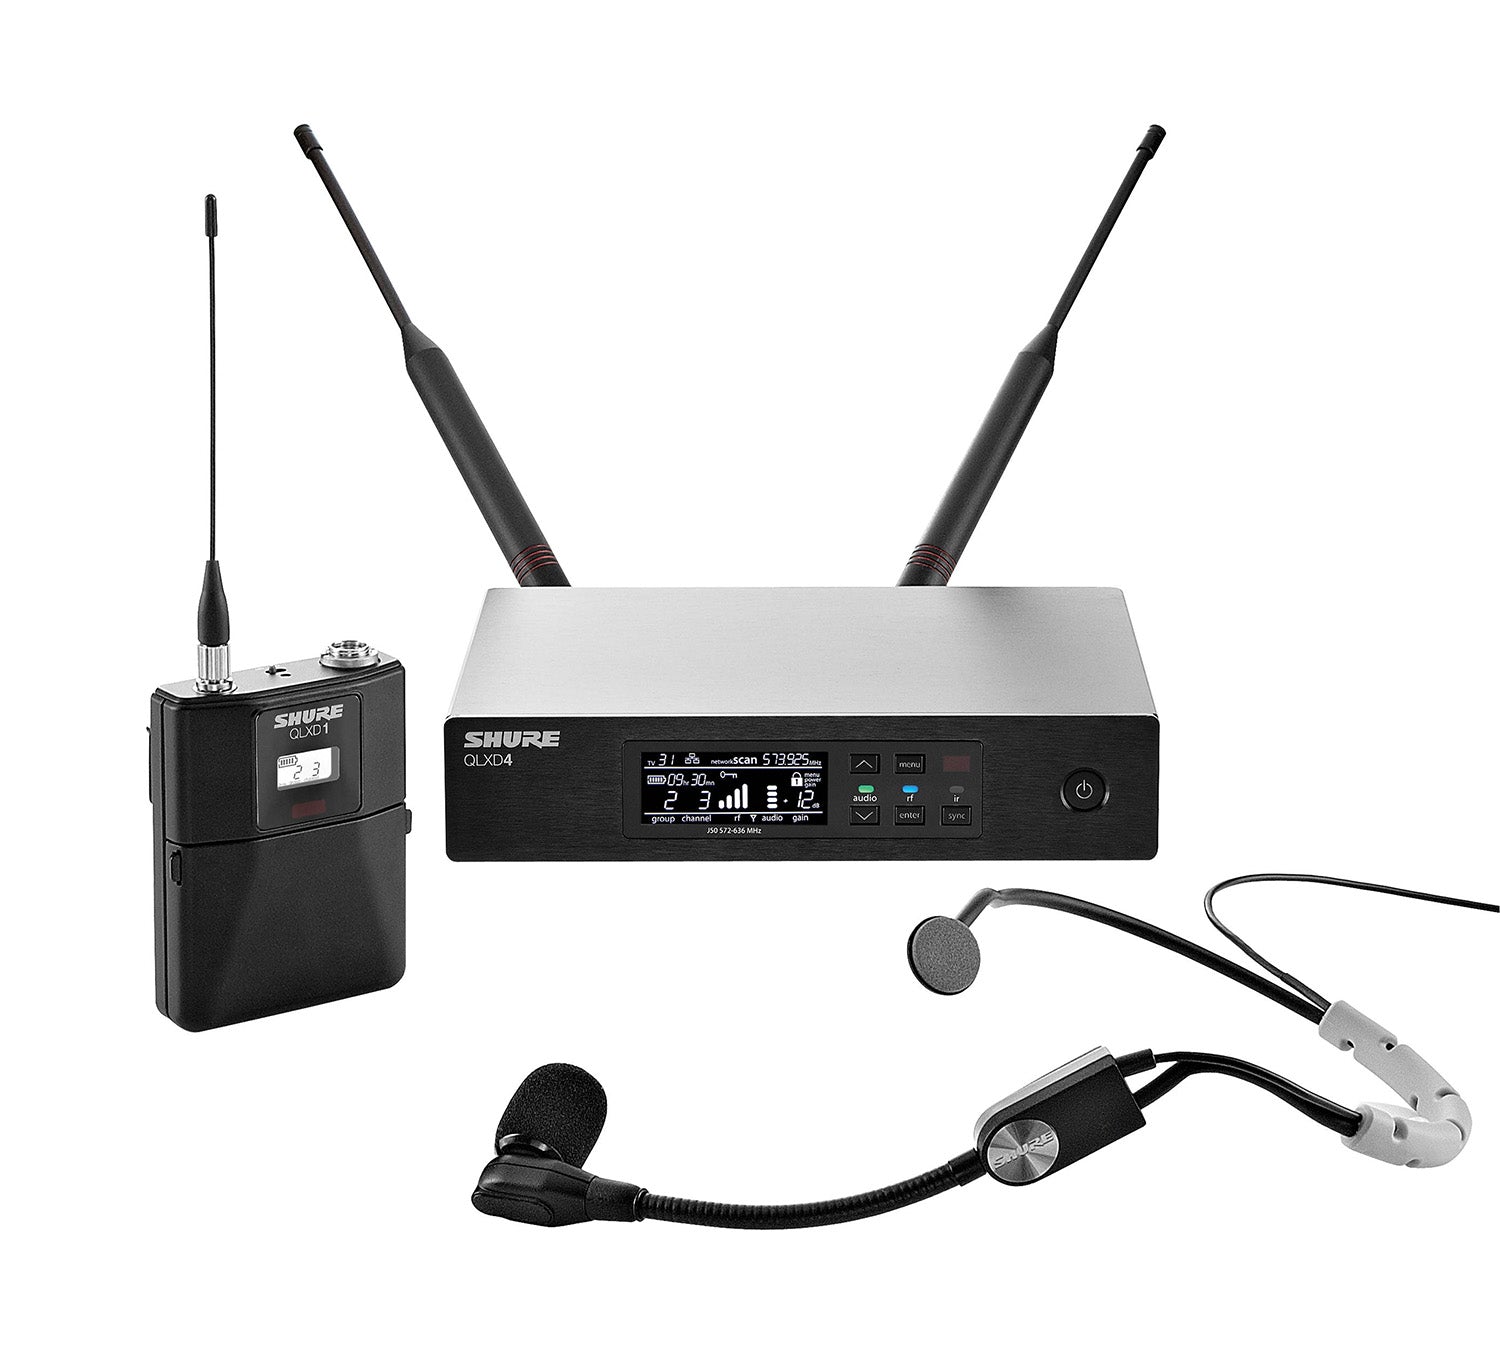 Shure QLXD14/SM35-H50 Headworn Wireless Microphone System with SM35 - H50 (534 to 598 MHz) - Hollywood DJ